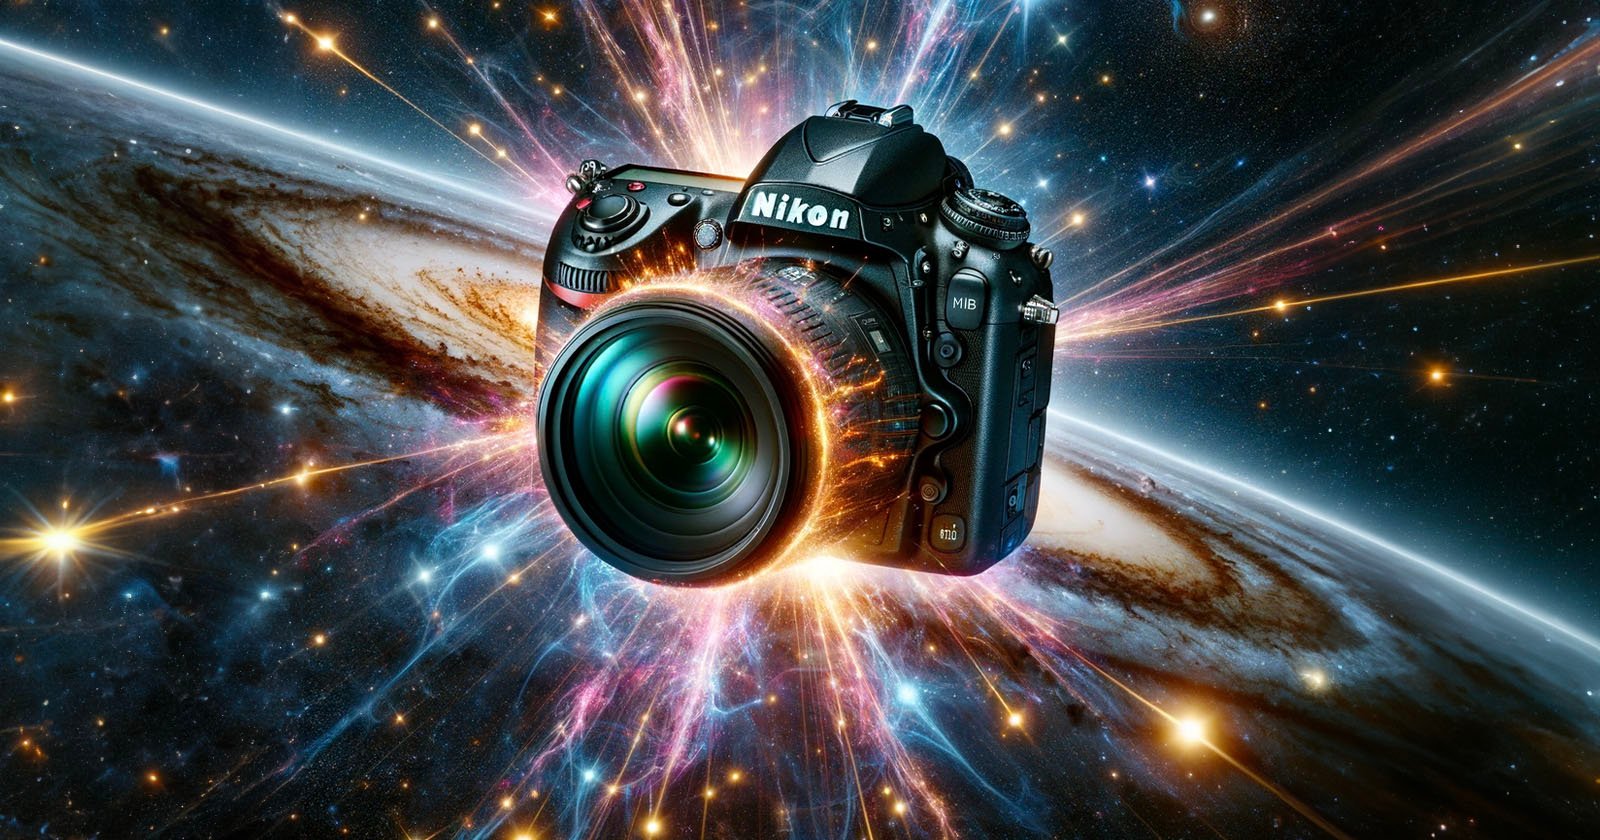 Nikon Makes Special Firmware for Astronauts to Block Galactic Cosmic Rays in Photos